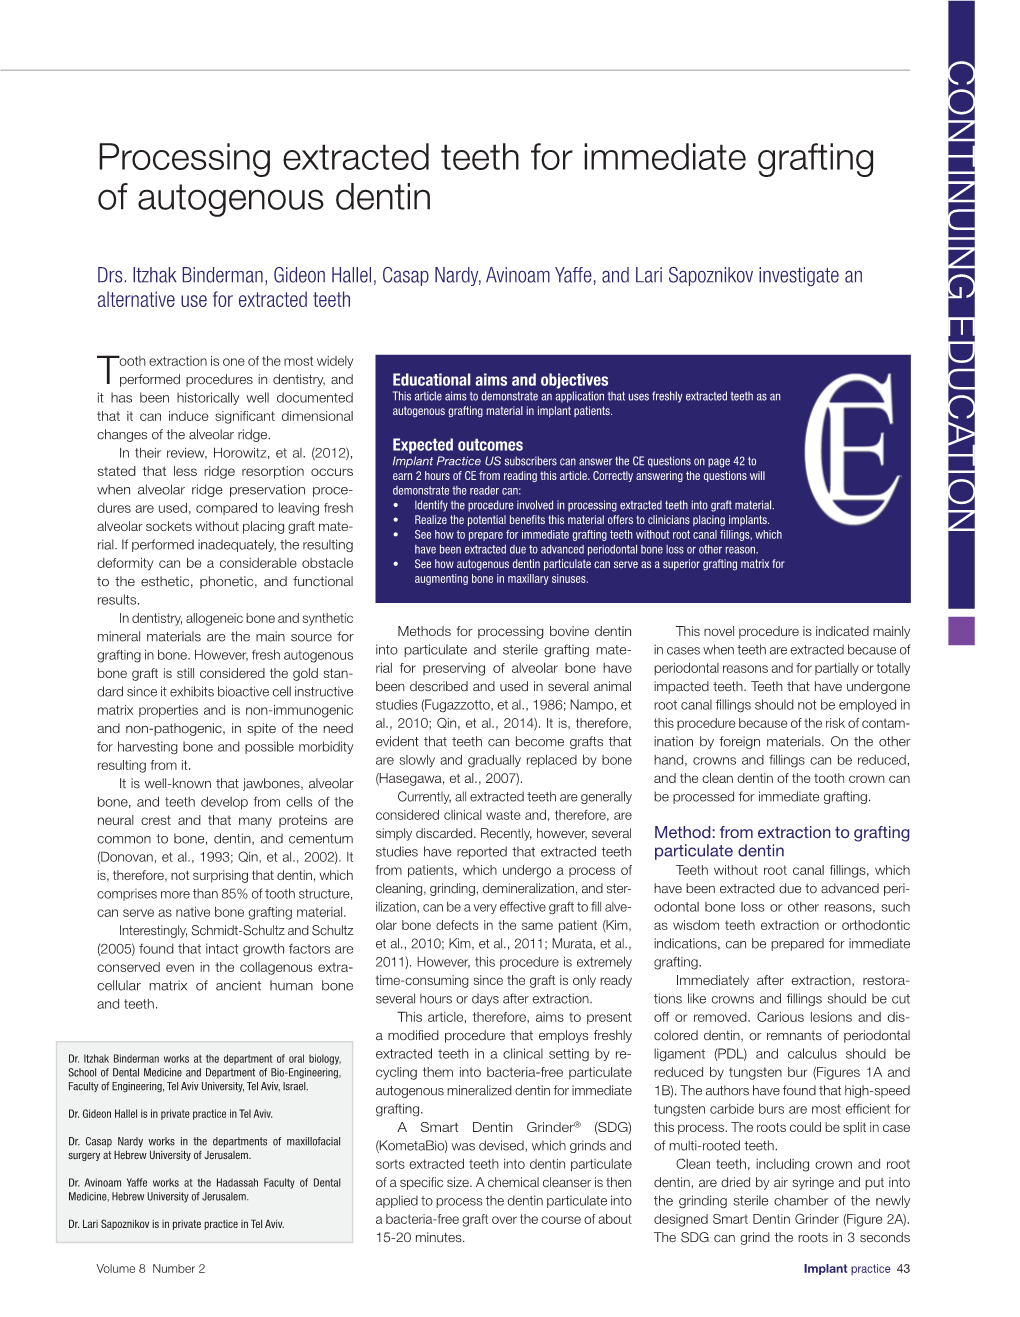 Processing Extracted Teeth for Immediate Grafting of Autogenous Dentin